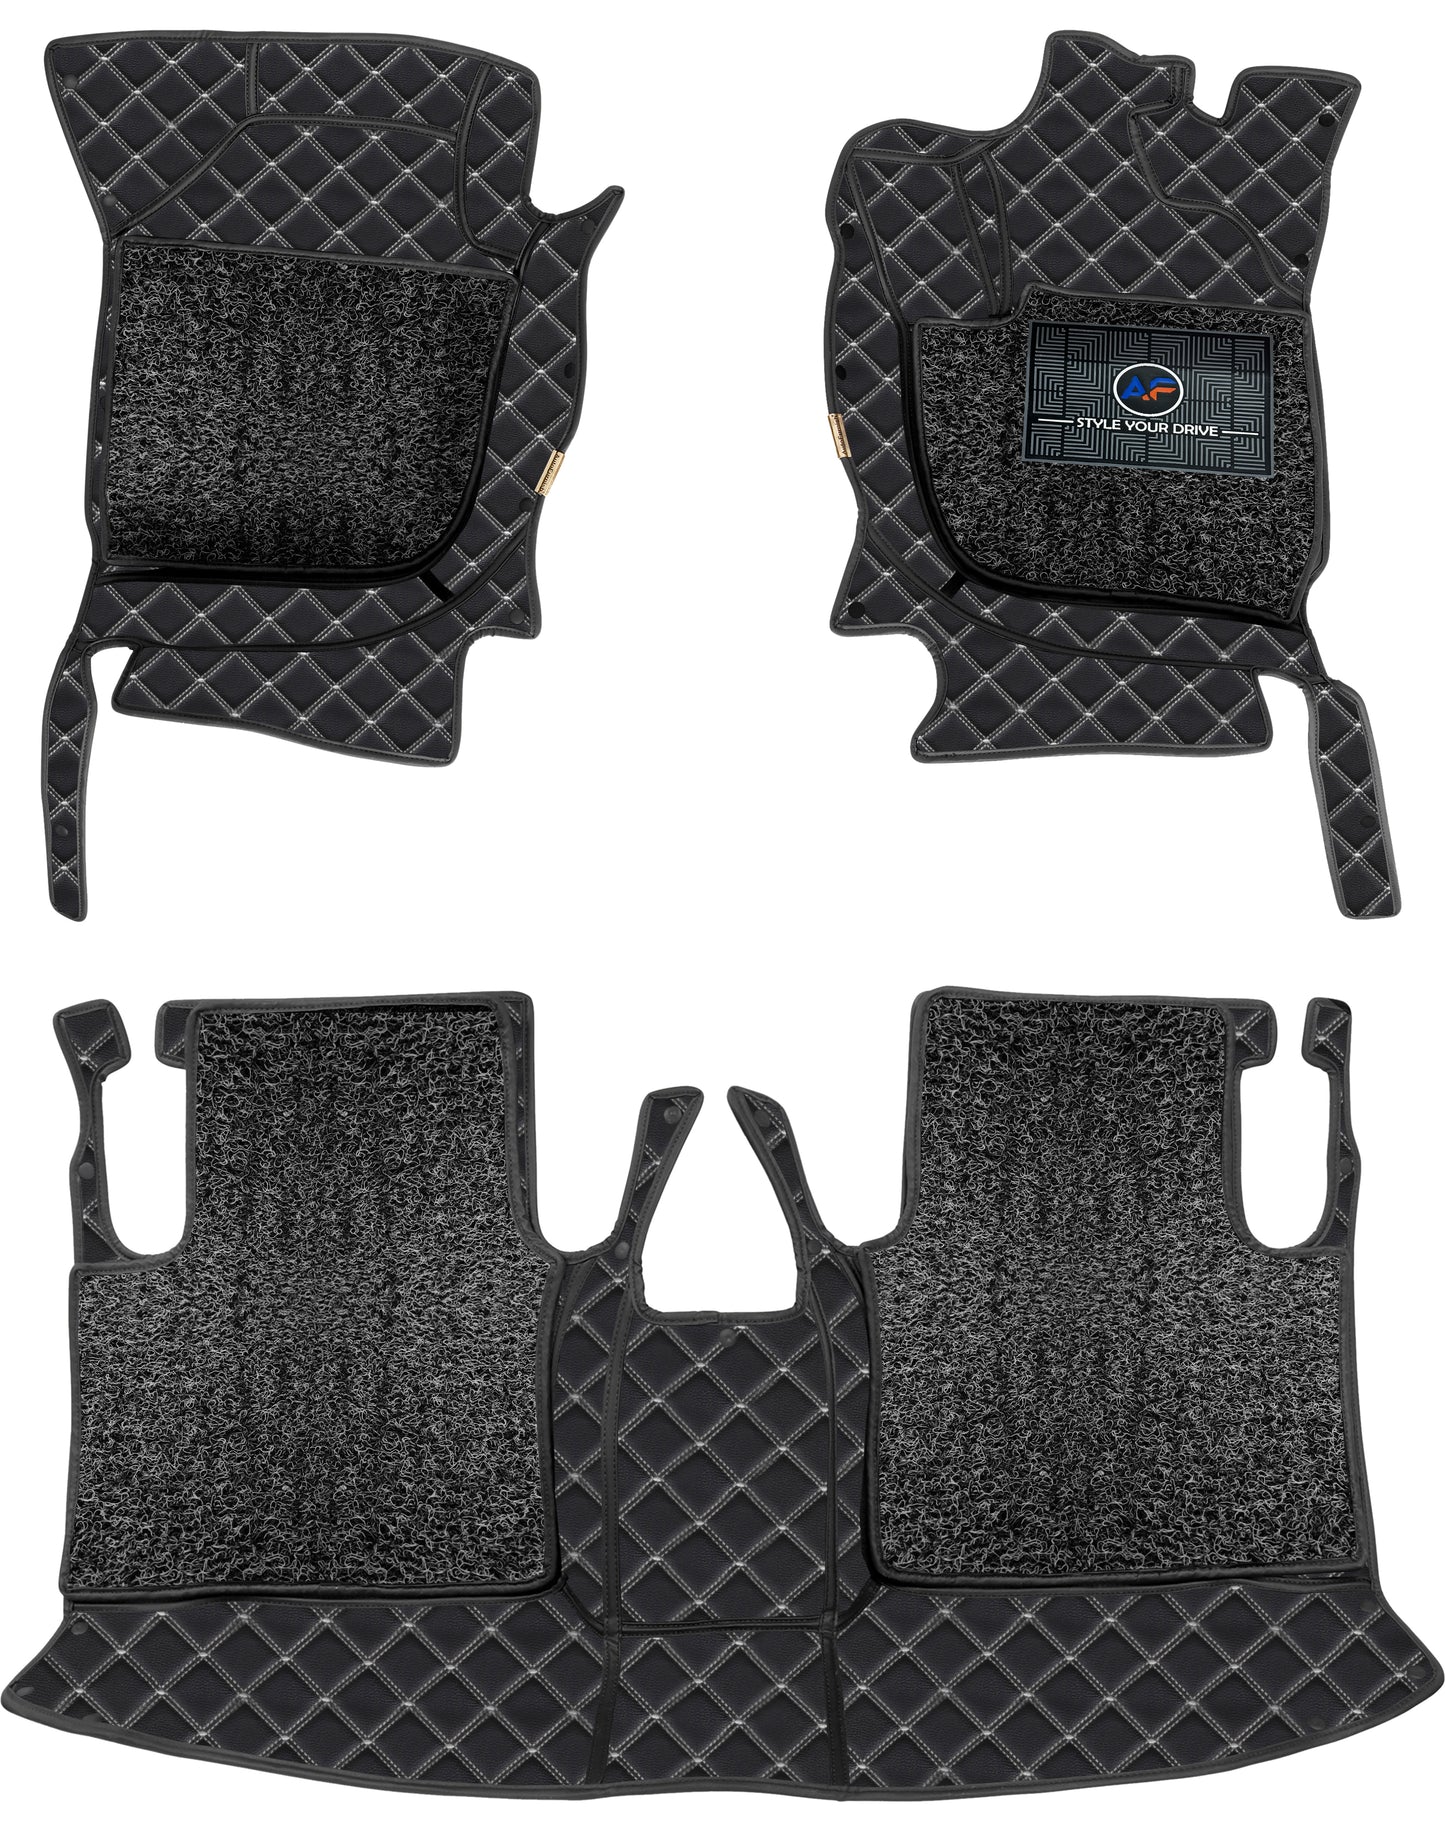 Land Rover Velar R-Dynamics 2022-7D Luxury Car Mat, All Weather Proof, Anti-Skid, 100% Waterproof & Odorless with Unique Diamond Fish Design (24mm Luxury PU Leather, 2 Rows)